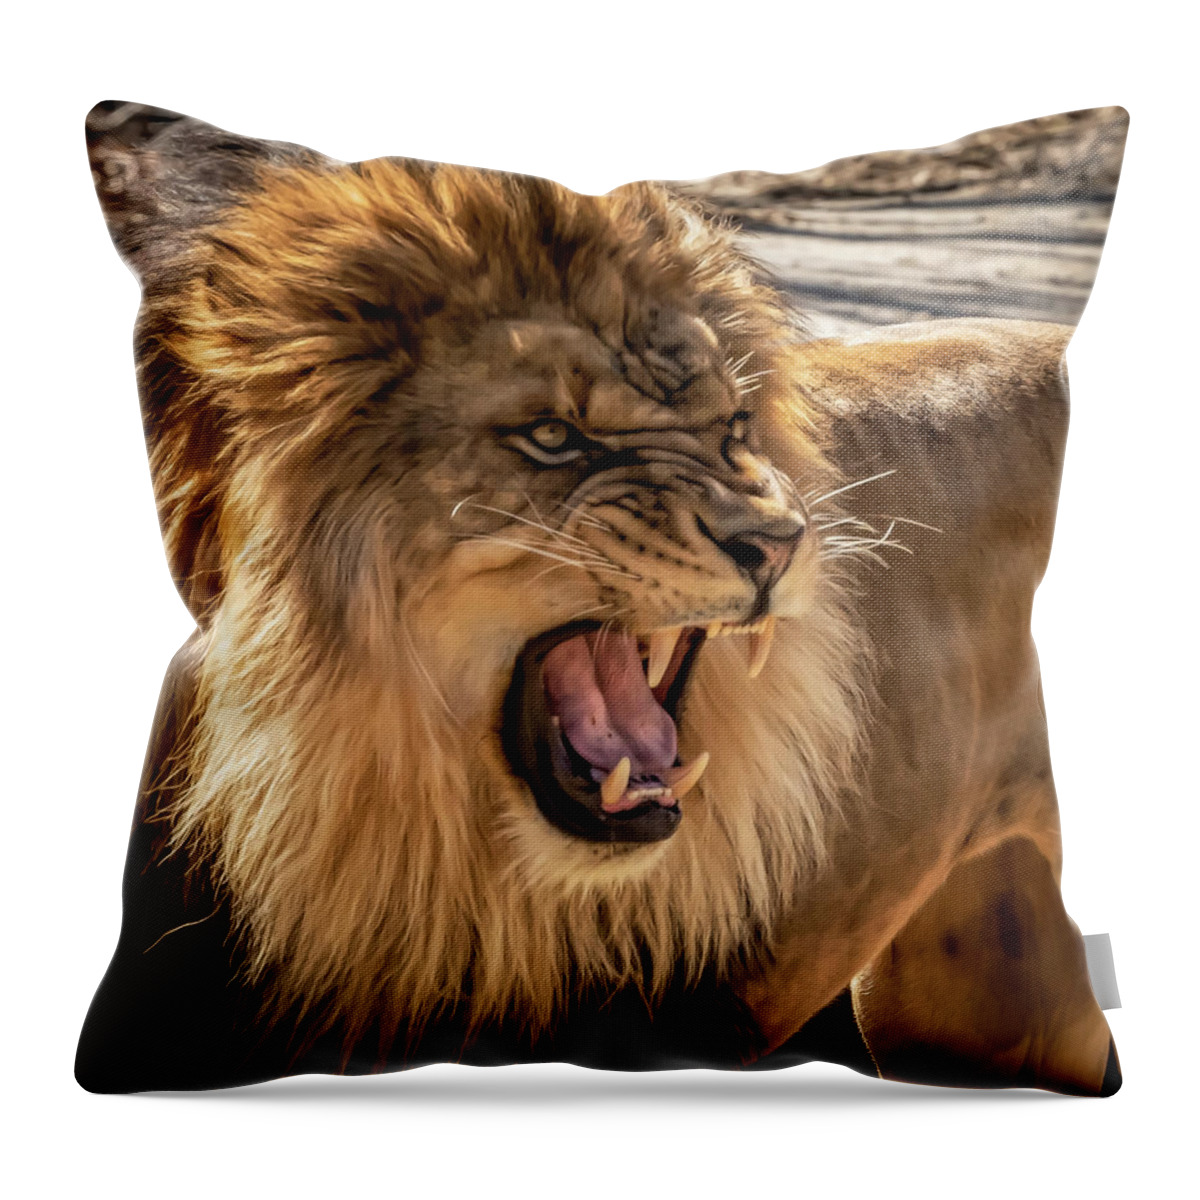 Male Lion Throw Pillow featuring the photograph I Am The King by David Pine